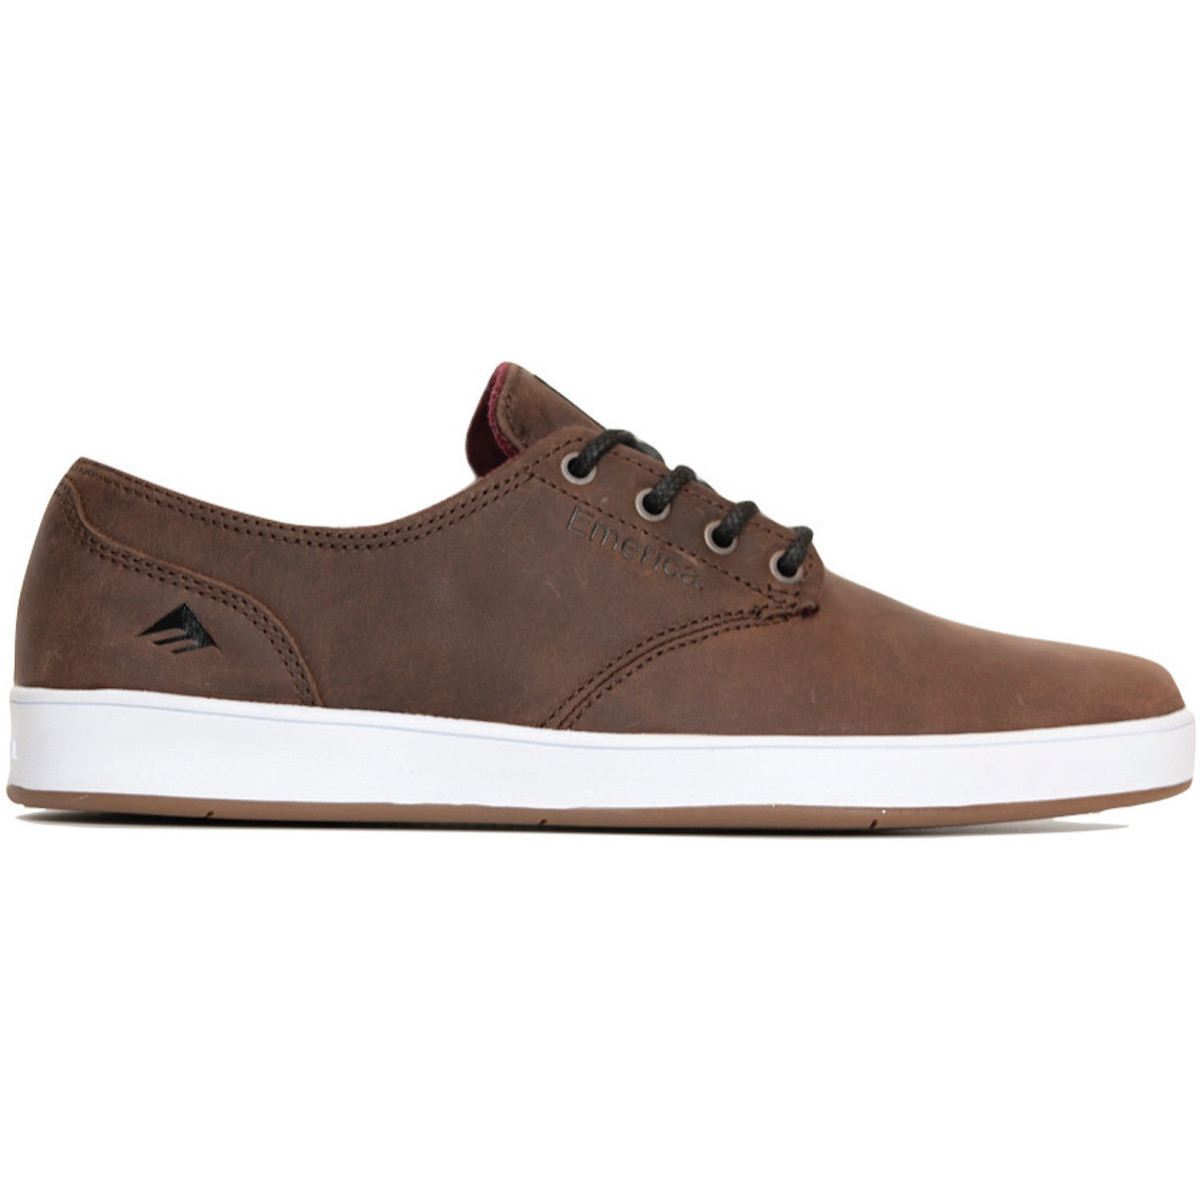 Chaussures Tony & Paul Emerica THE ROMERO LACED BROWN GREY WHITE 